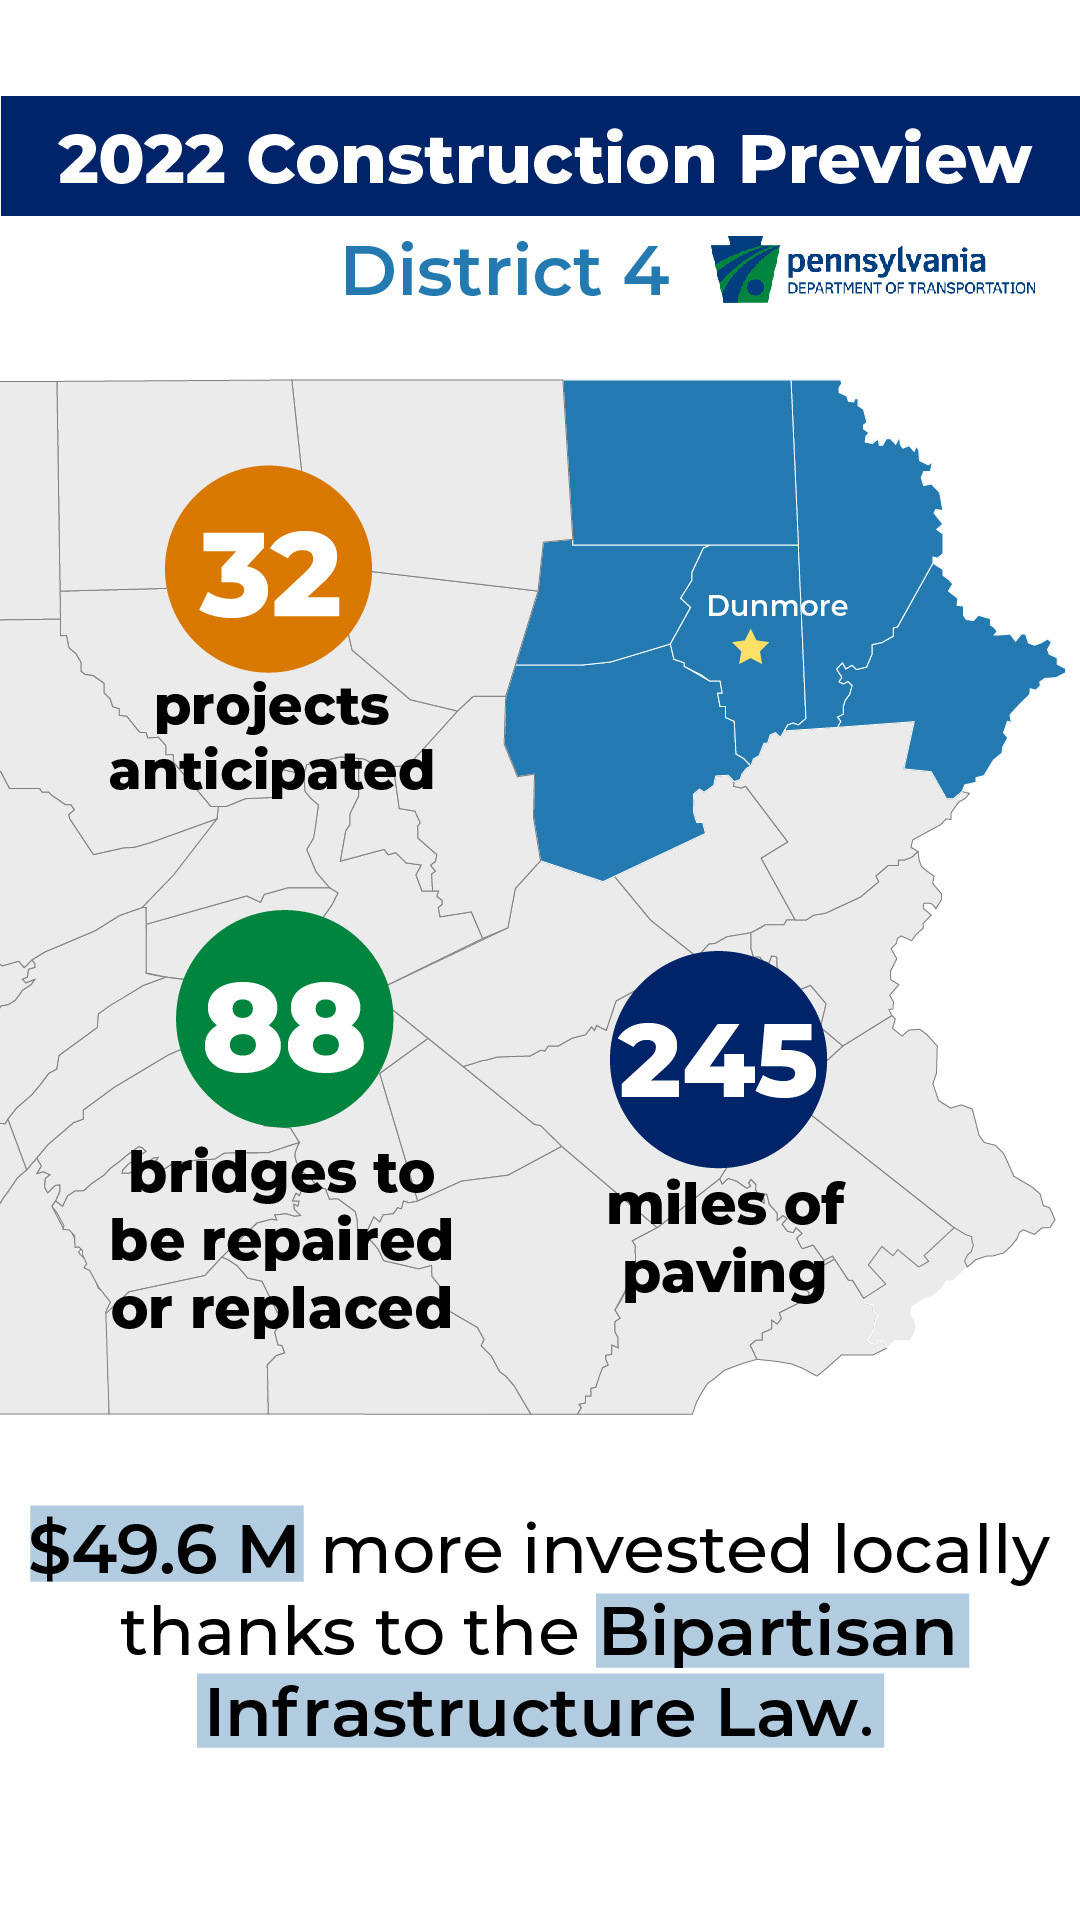 In PennDOT's District 4, 32 projects are anticipated for 2022, as well as 245 miles of paving and 88 bridge projects. Thanks to the Bipartisan Infrastructure Law, $49.6 million more will be invested locally.